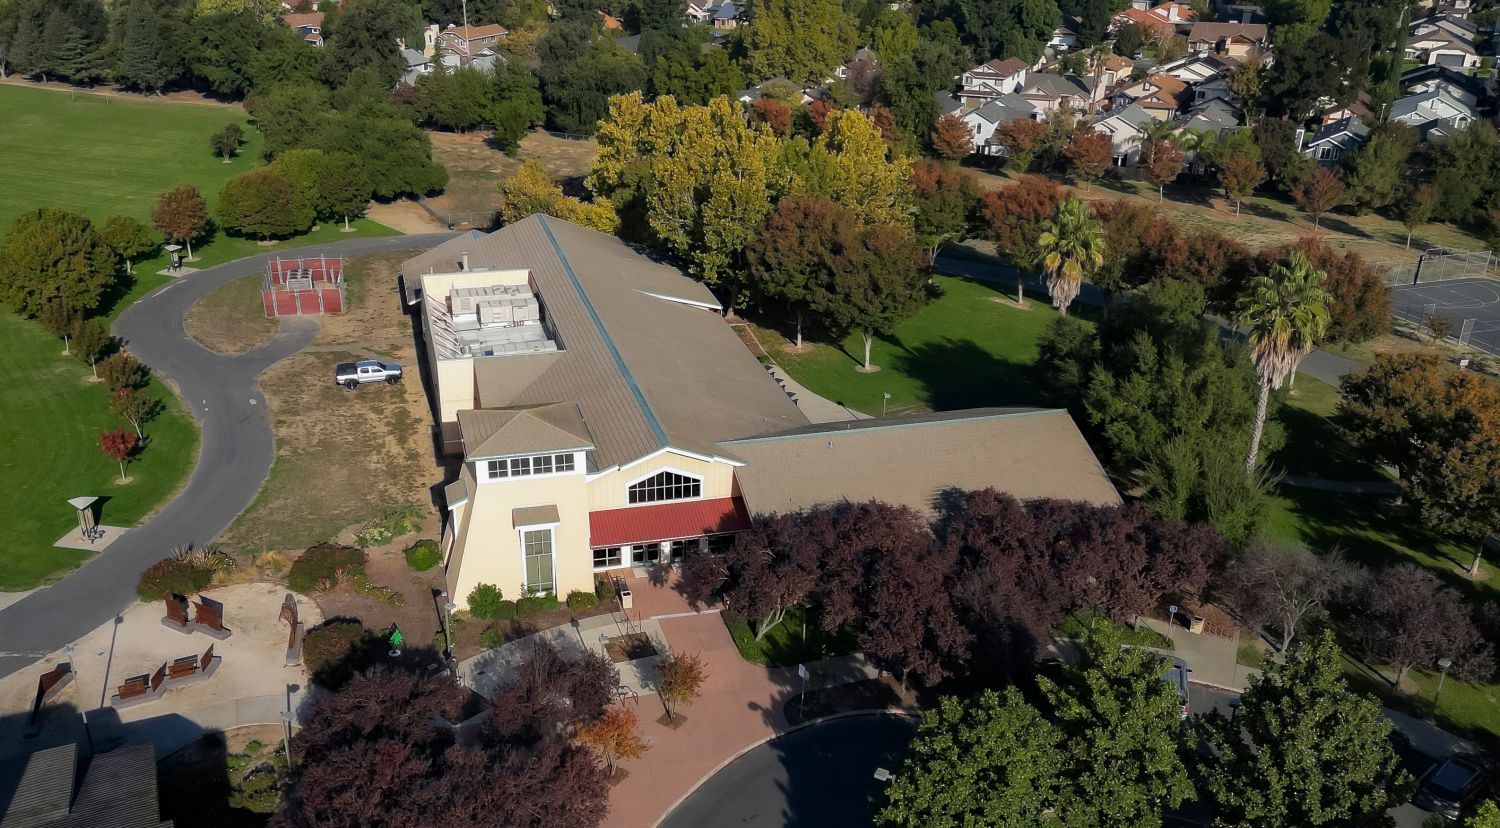 South natomas community center from the air